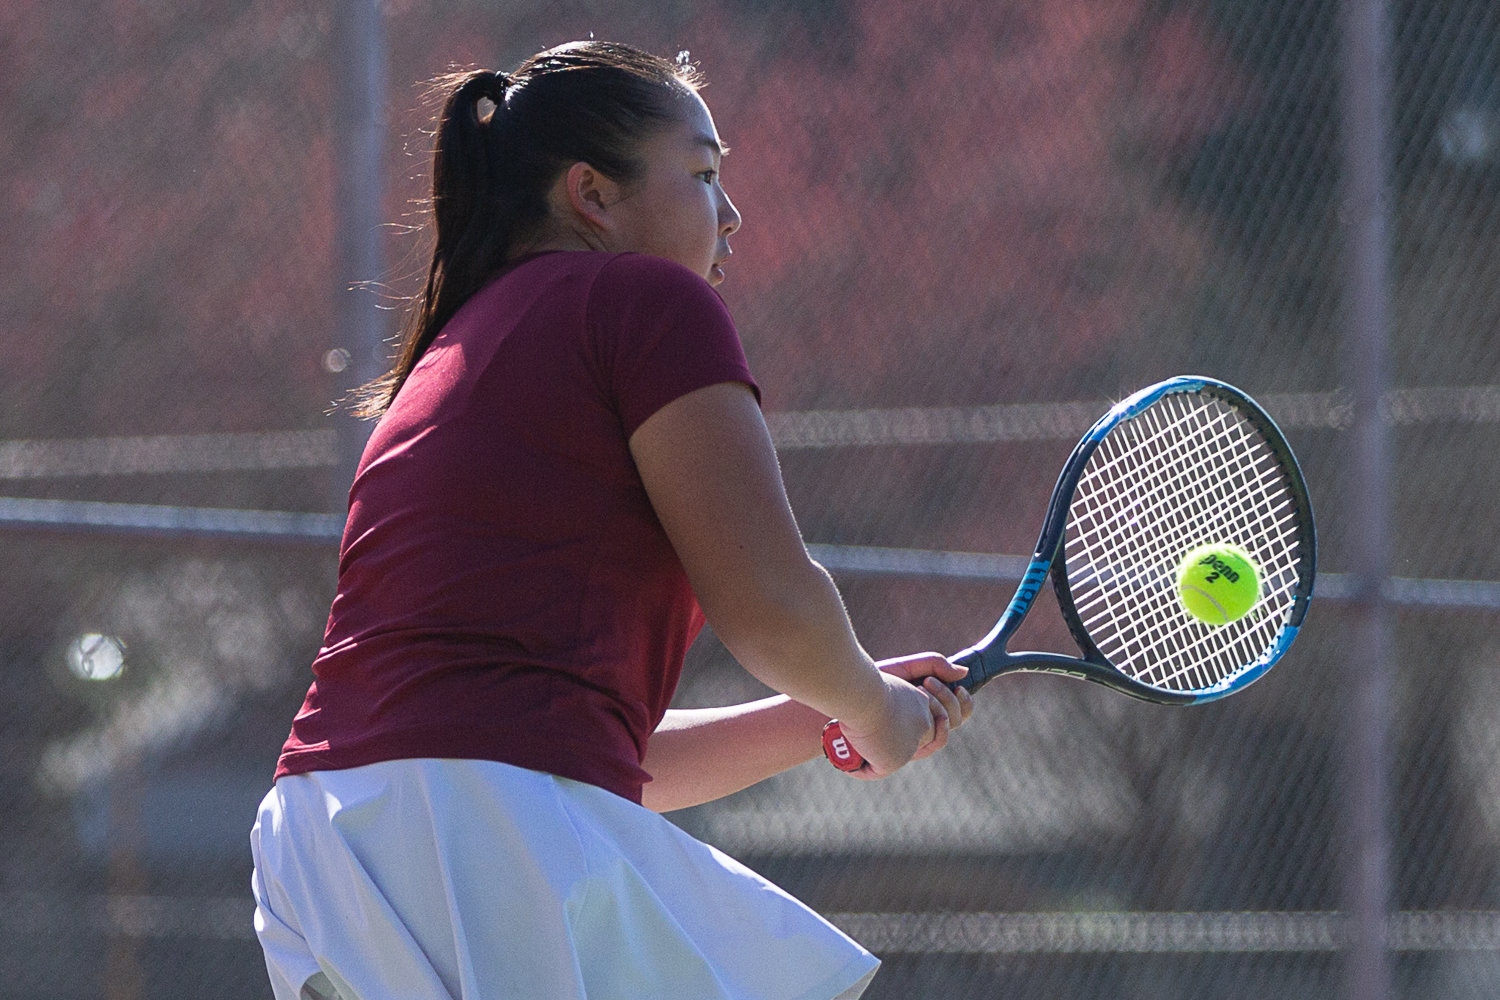 W.F. West singles player Laura Yip returns a volley against Tumwater March 29.